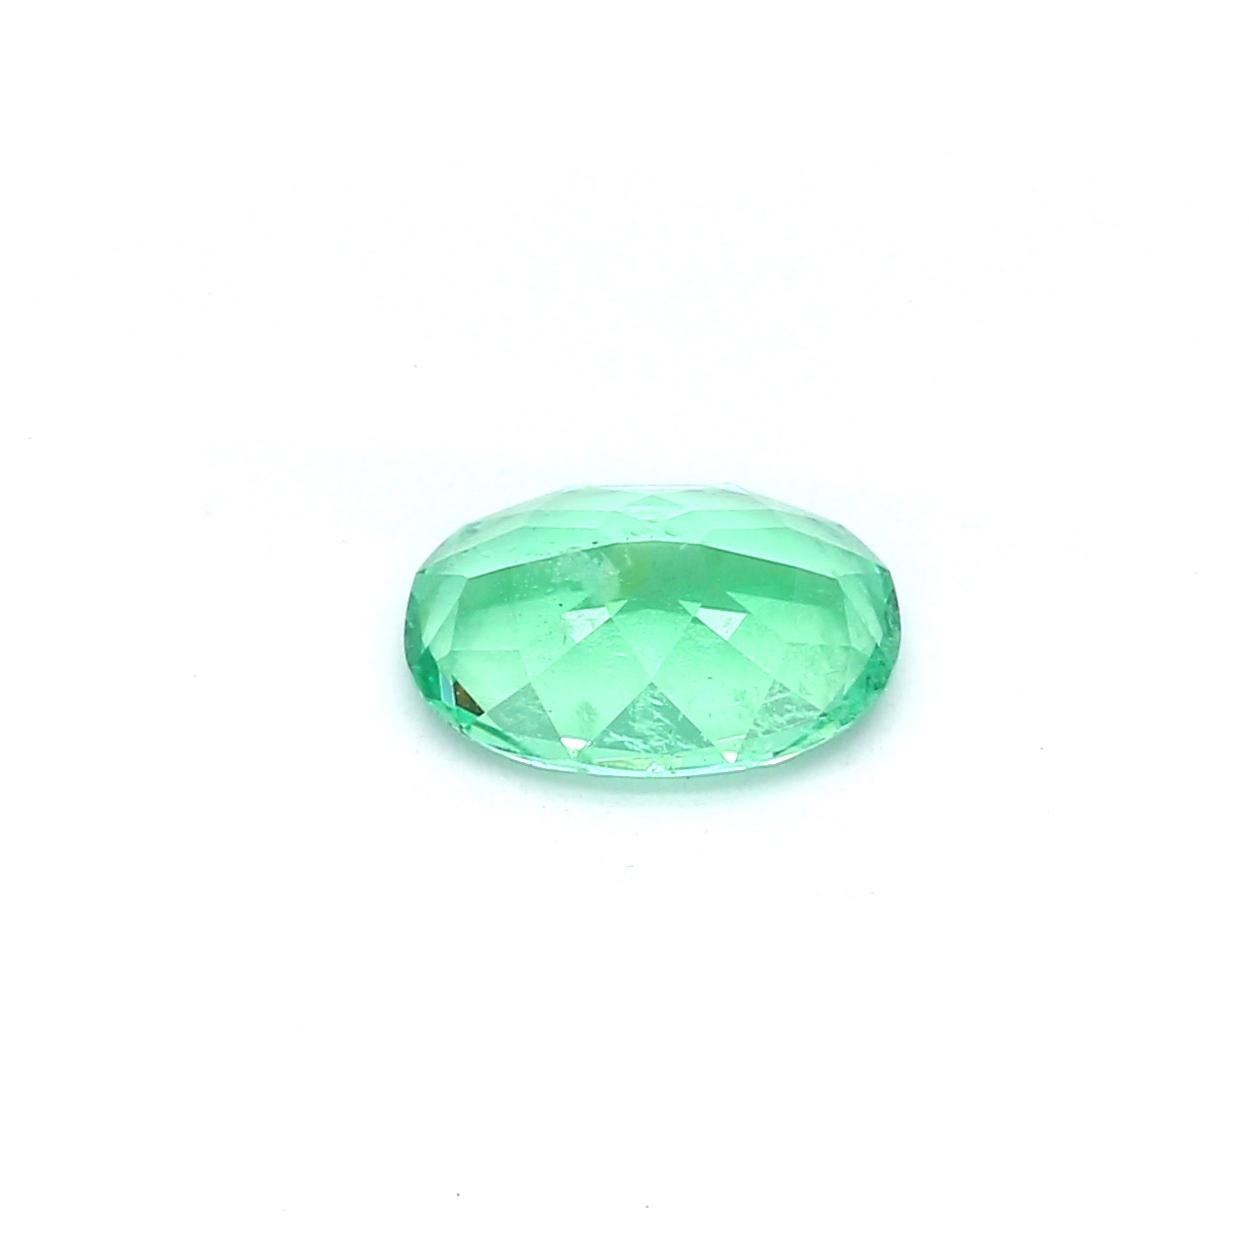 An amazing Russian Emerald which allows jewelers to create a unique piece of wearable art.
This exceptional quality gemstone would make a custom-made jewelry design. Perfect for a Ring or Pendant.

Shape - Oval
Weight - 1.28 ct
Treatment -